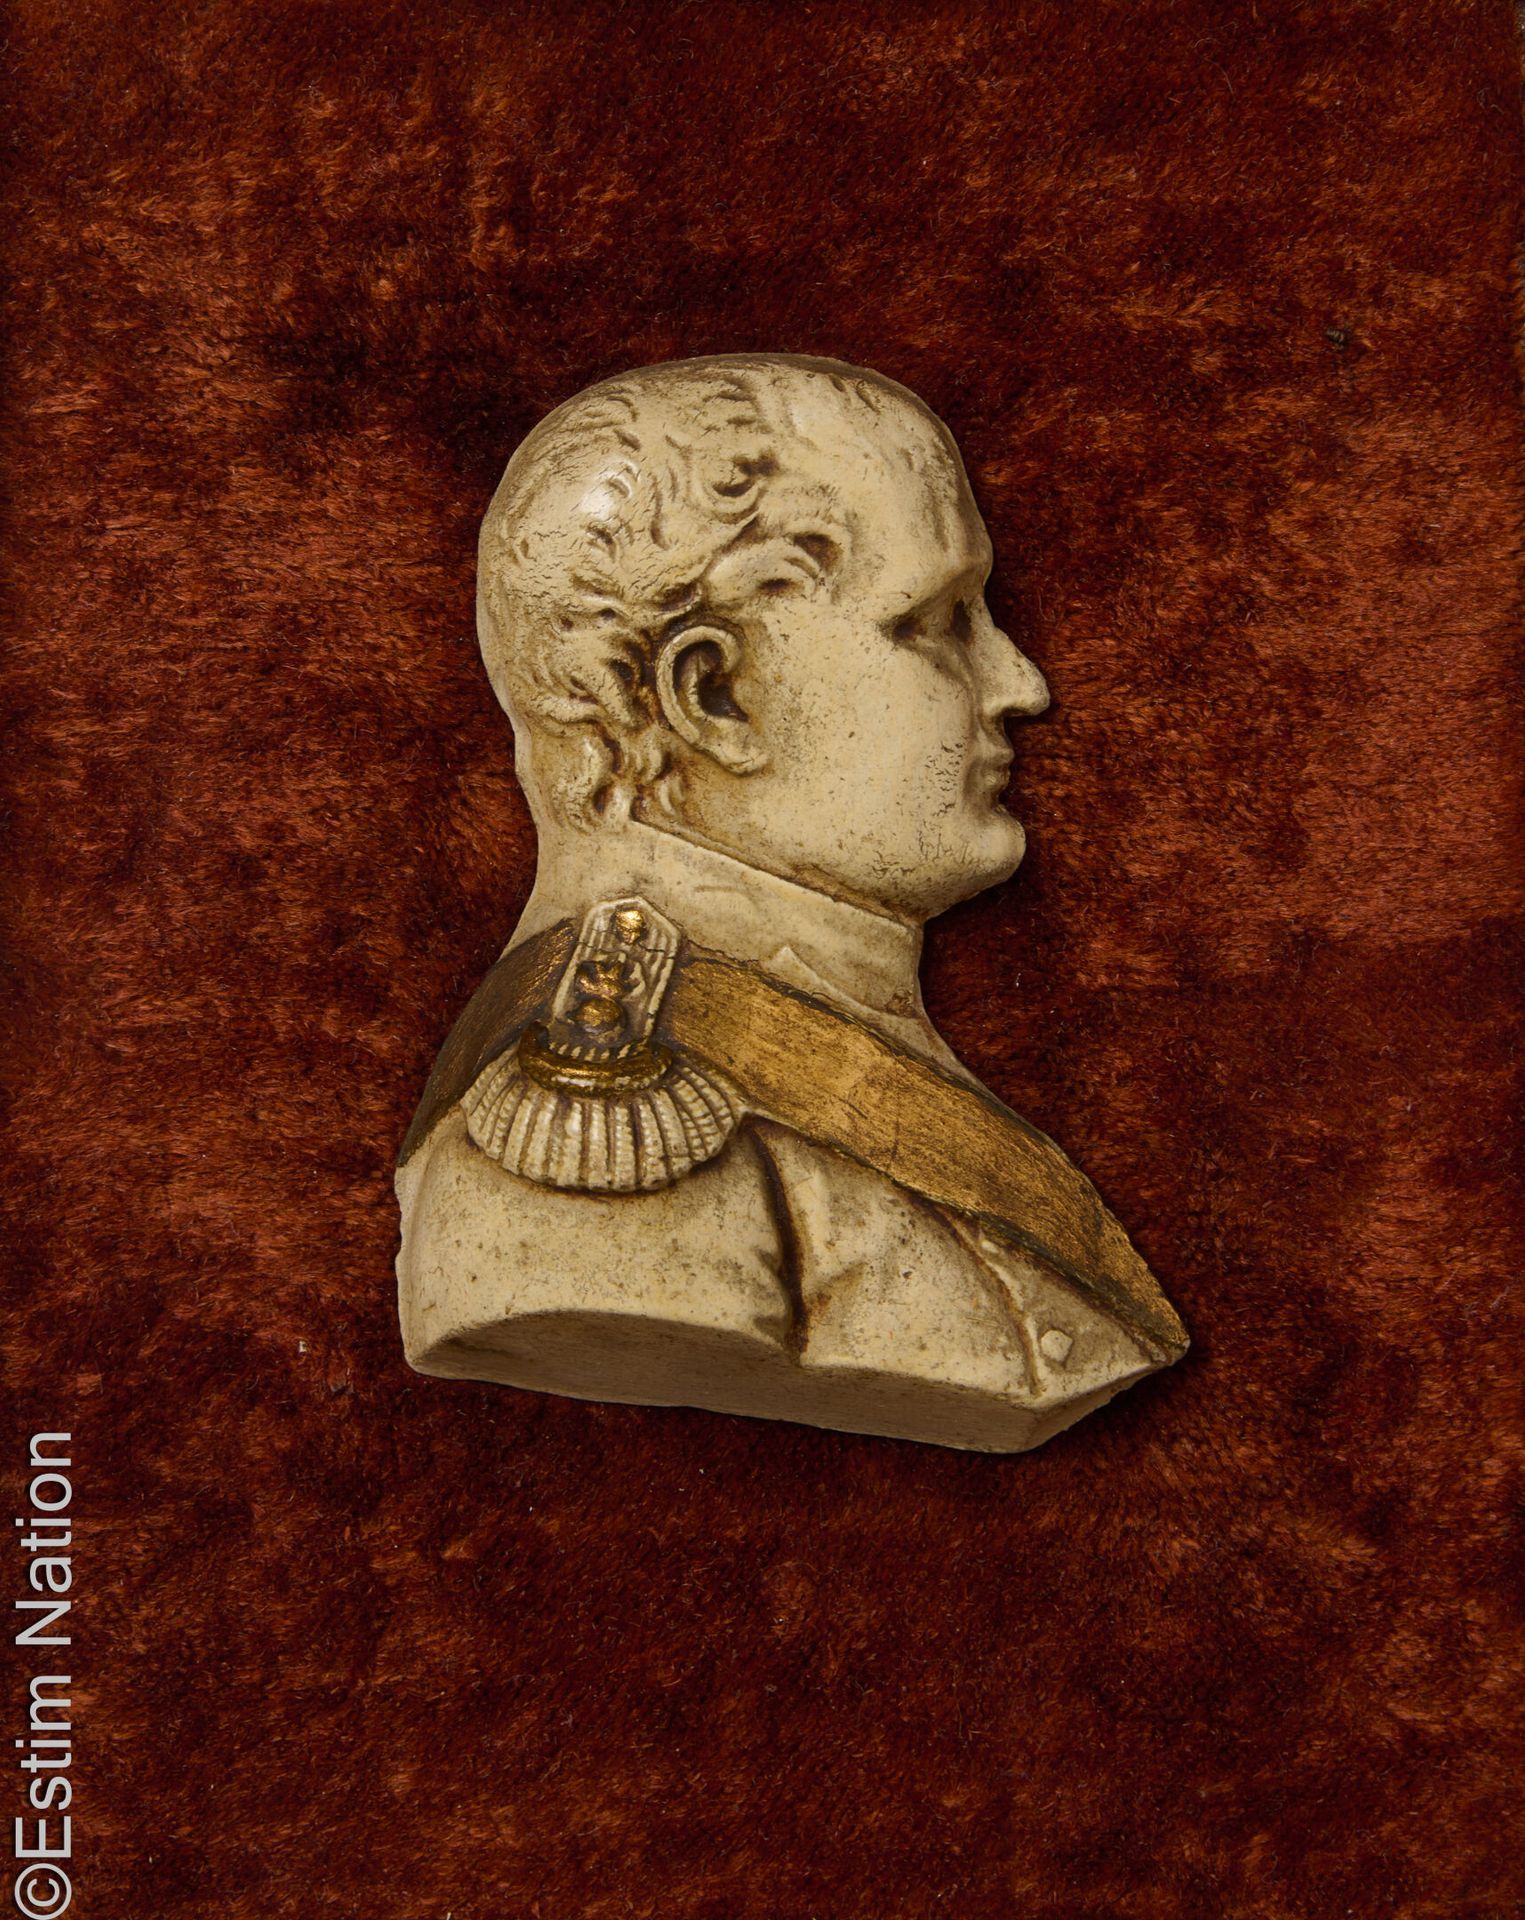 NAPOLEON Profile of Napoleon
Bas-relief and frame in plaster with gold highlight&hellip;